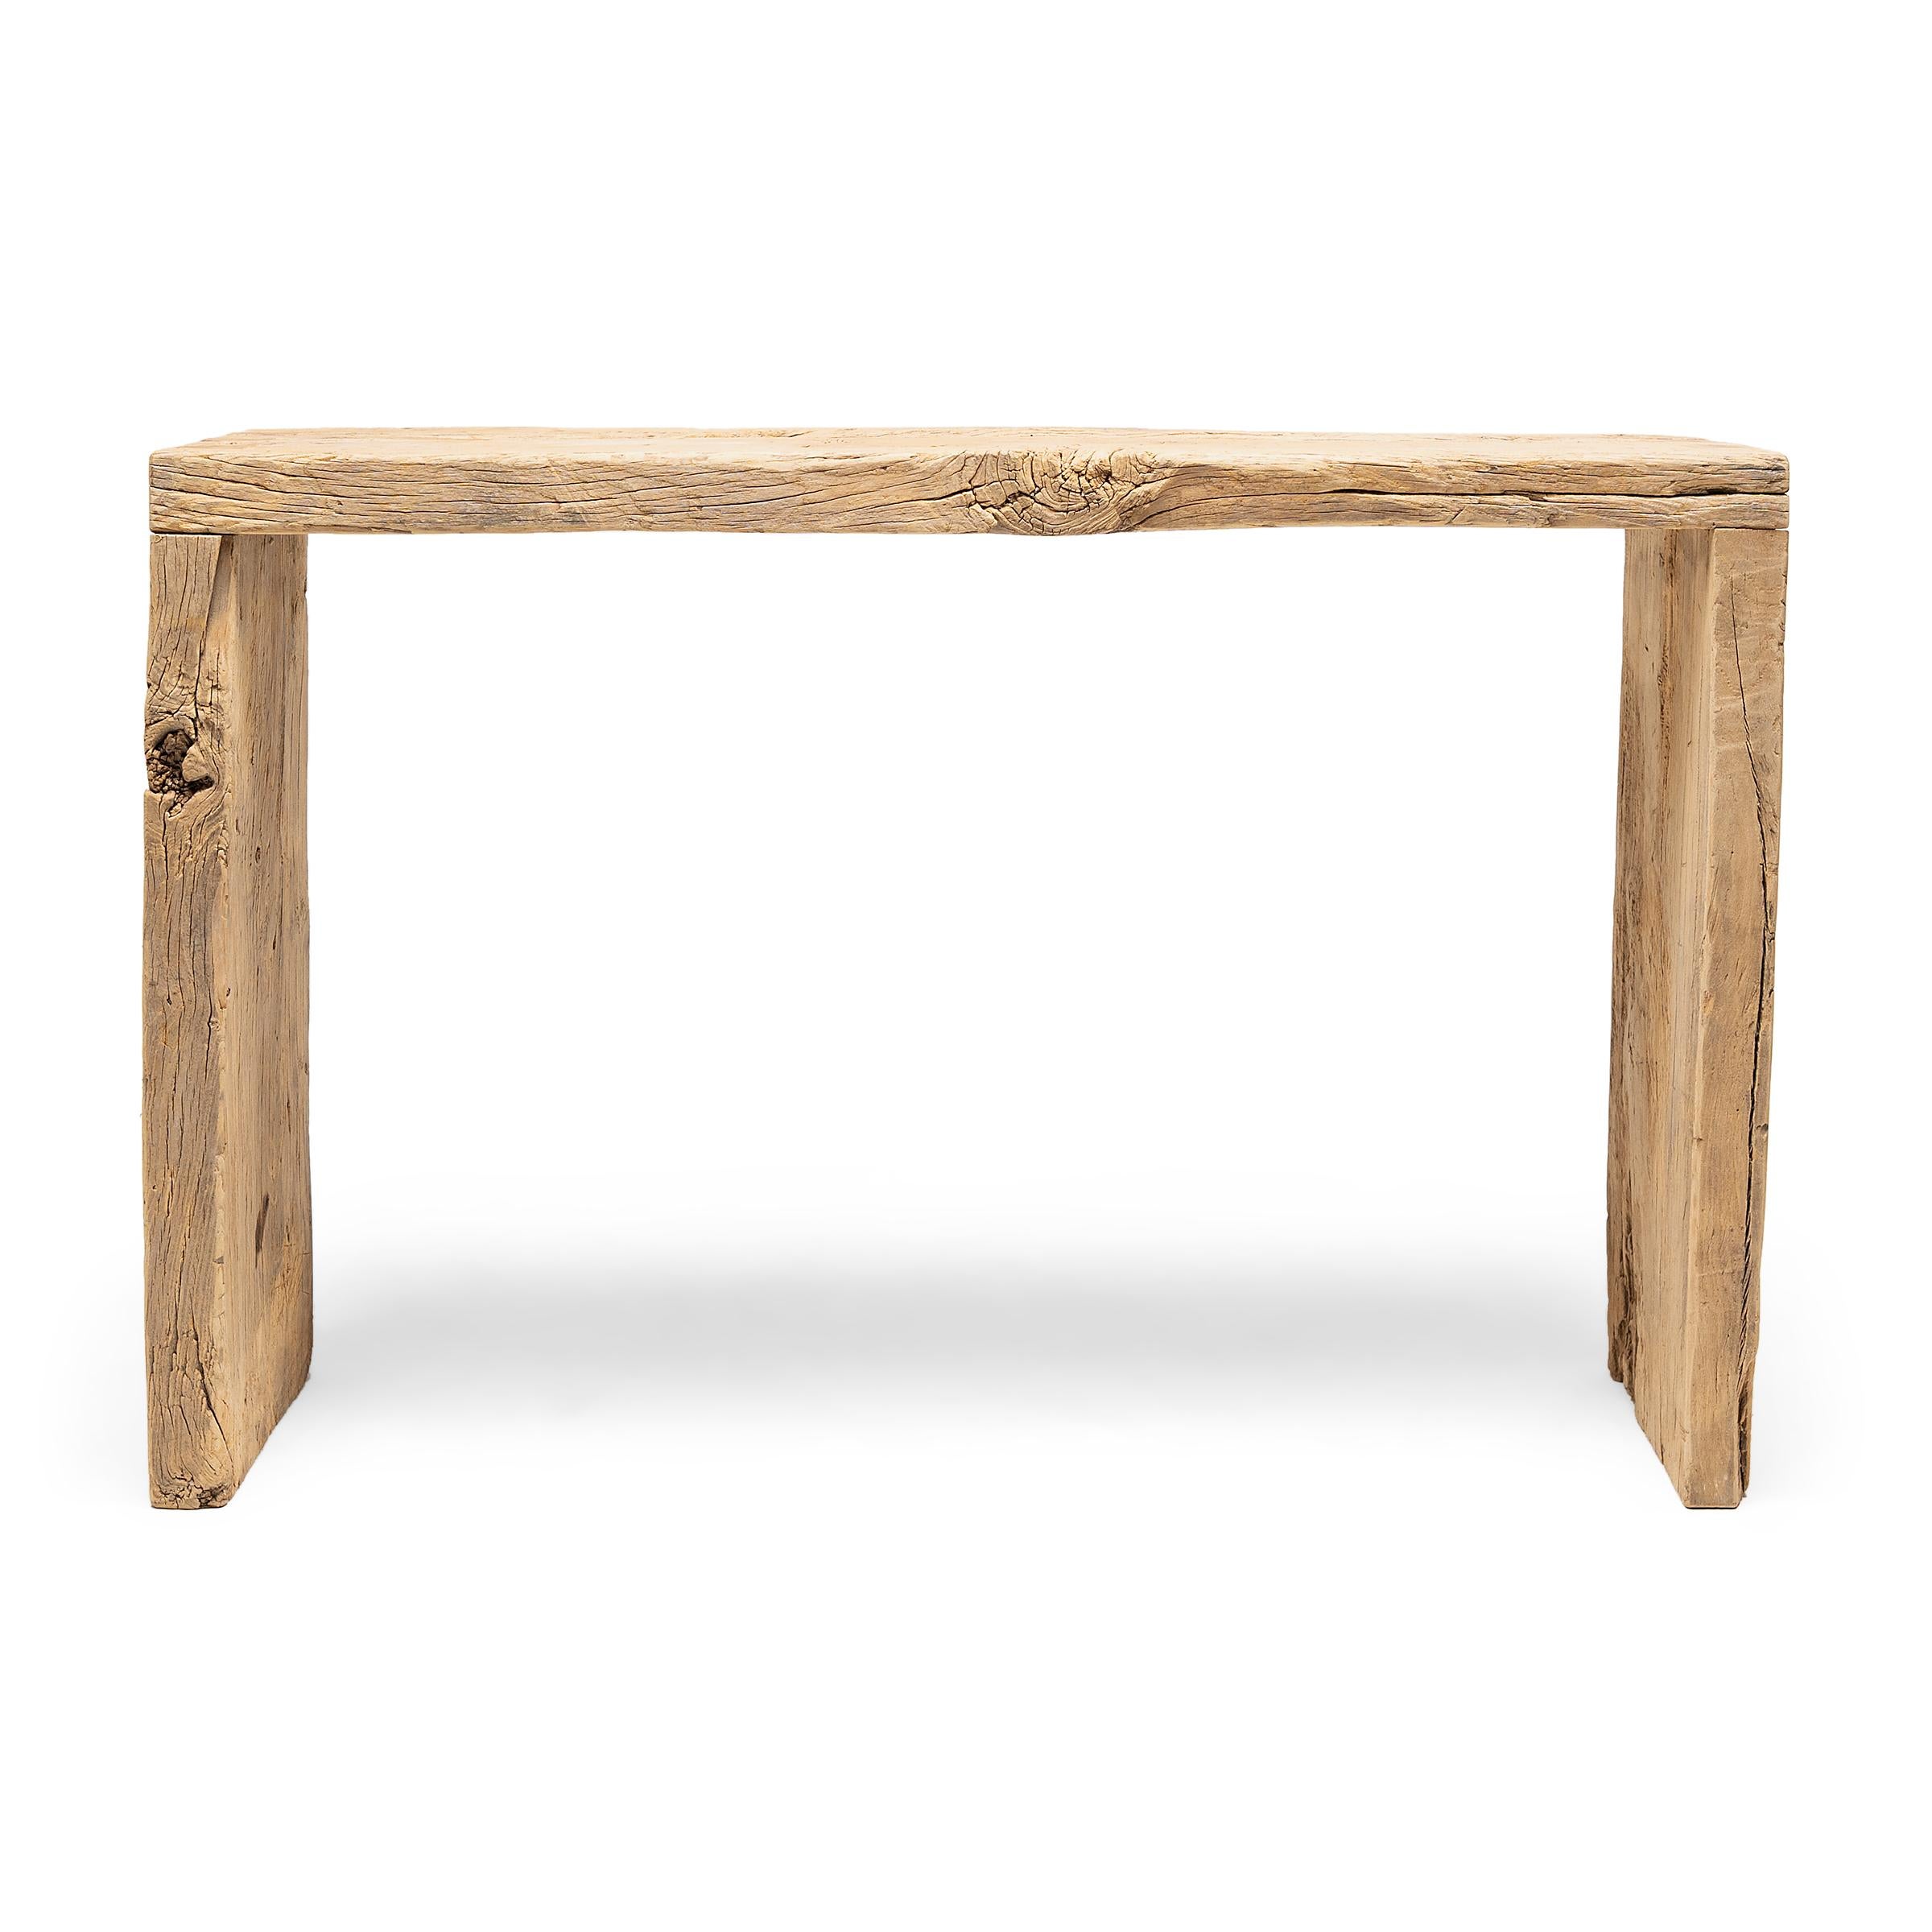 This contemporary console table is a celebration of wabi-sabi style. Crafted of wood reclaimed from Qing-dynasty architecture, the table has a minimalist waterfall design and is left unfinished to preserve the natural beauty of its materials.